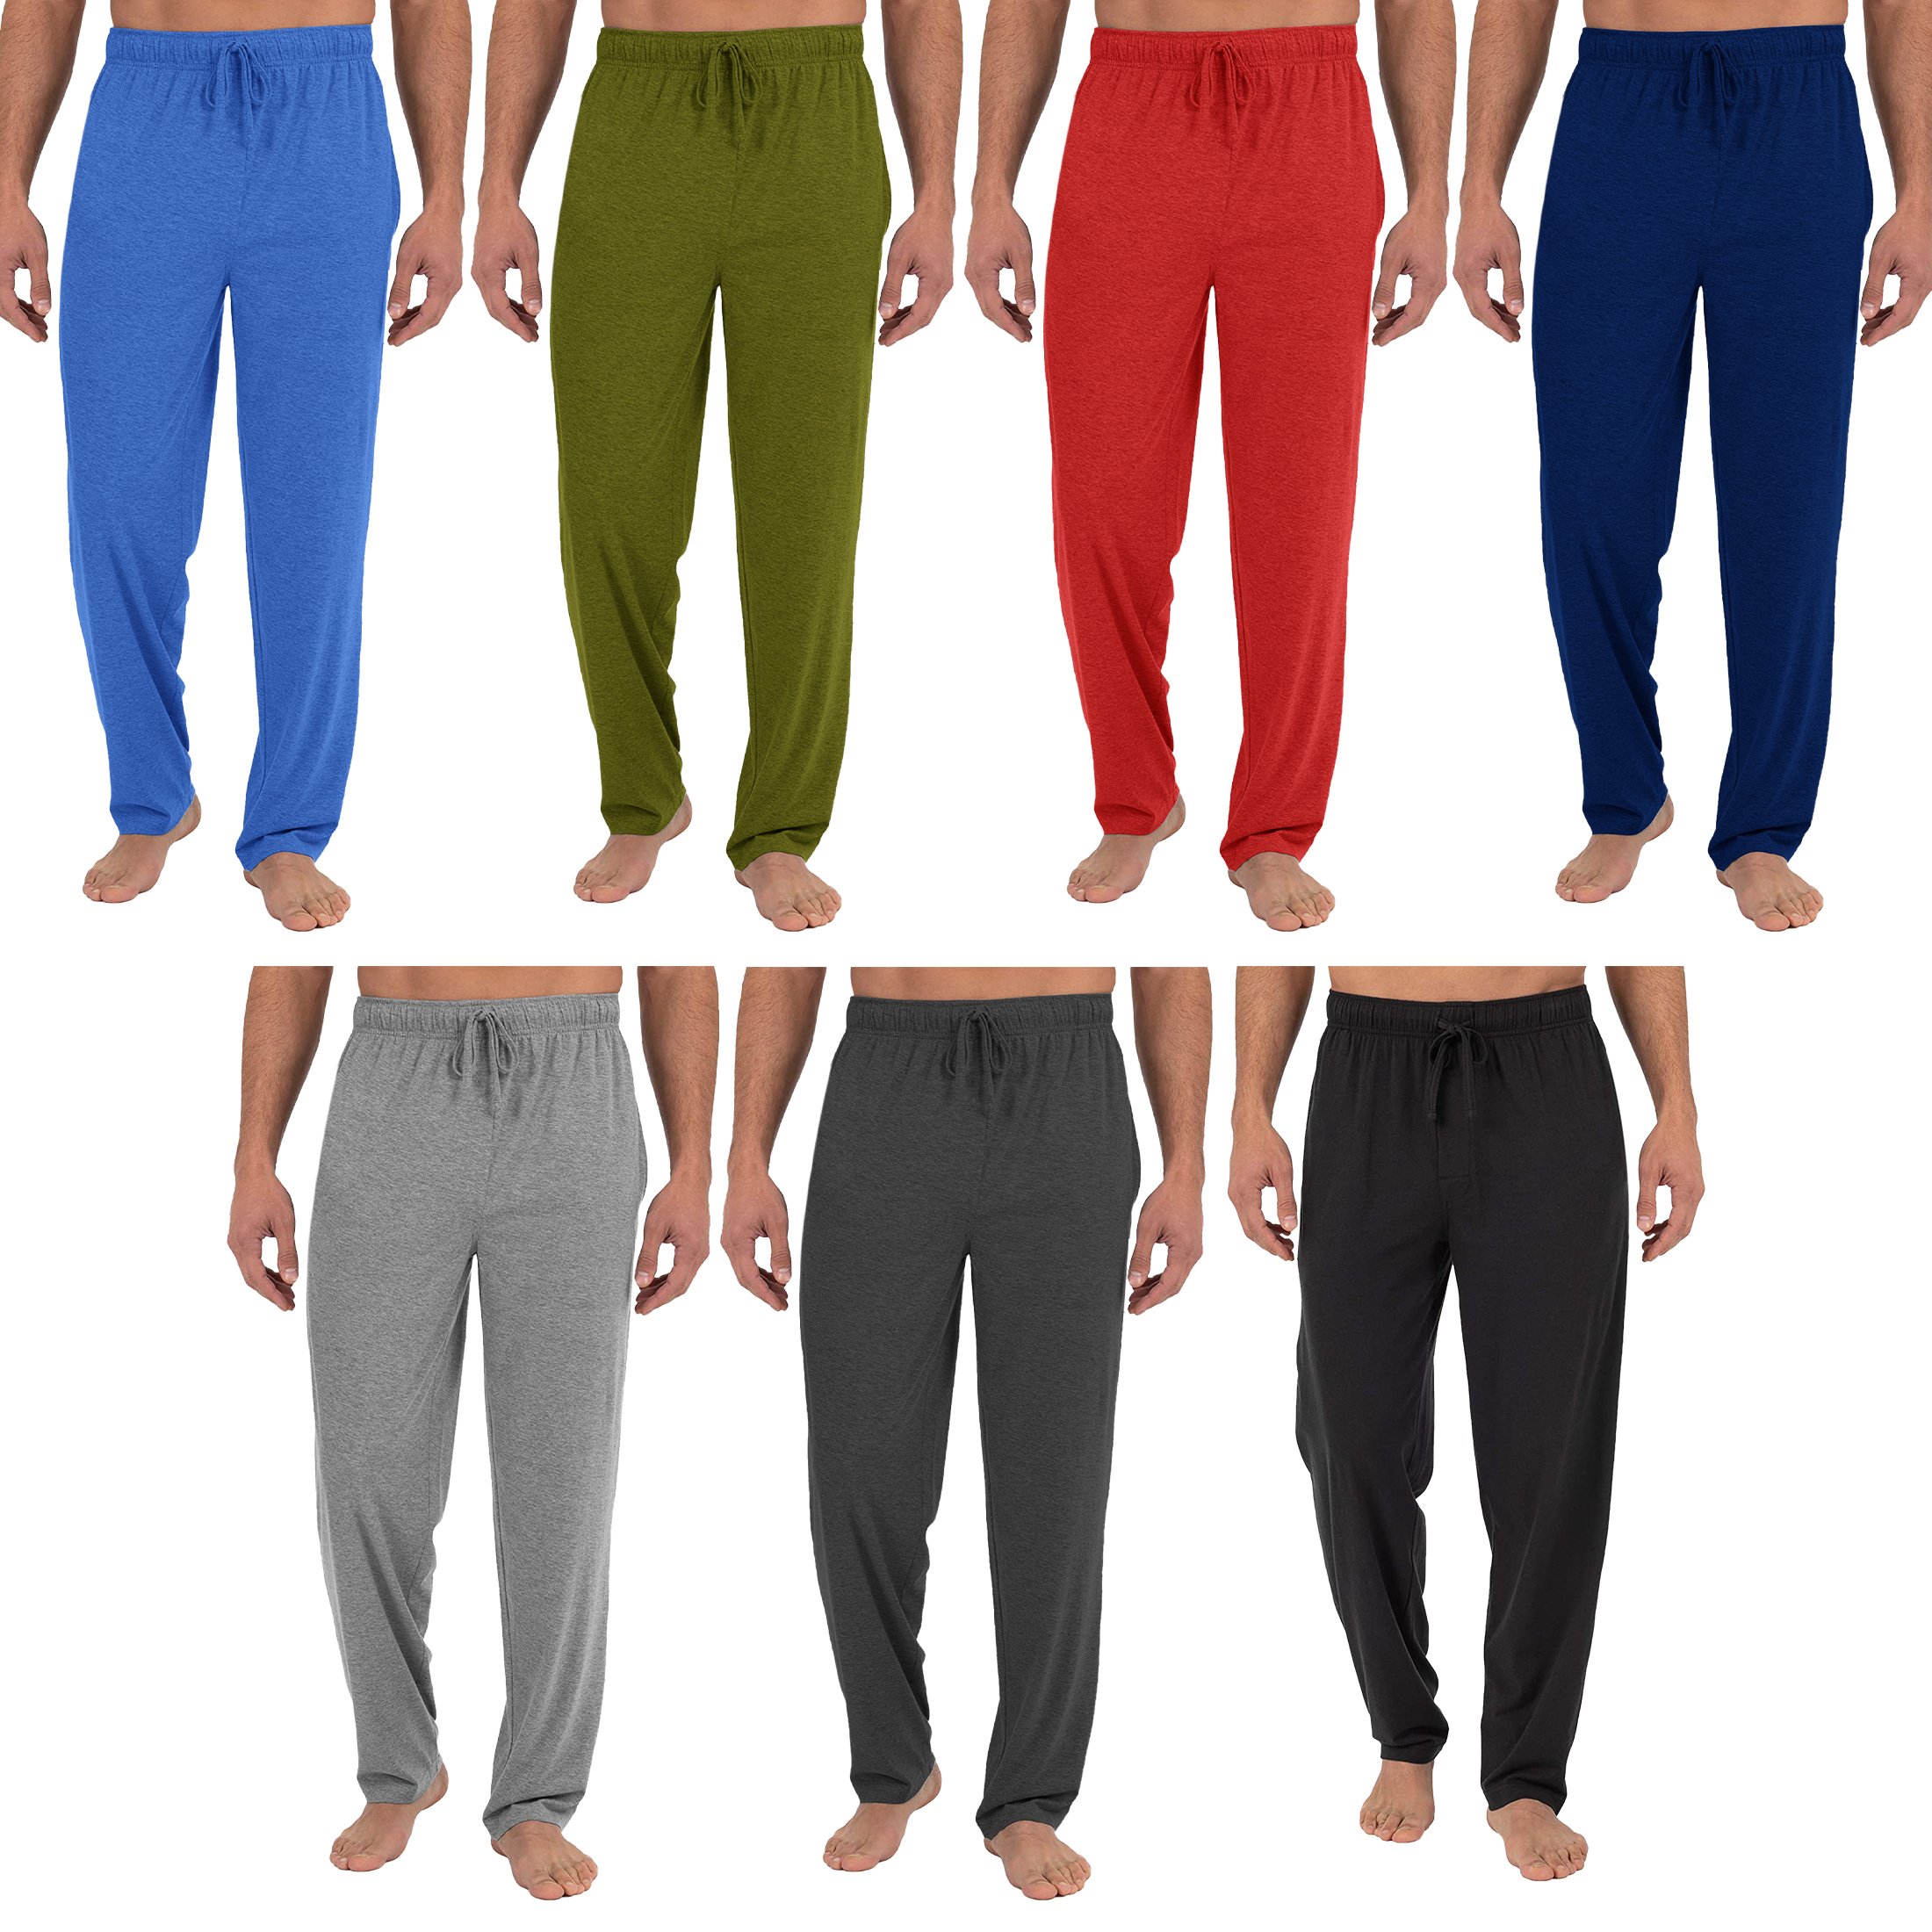 3-Pack: Men's Soft Jersey Knit Long Lounge Sleep Pants With Pockets - Solid, X-Large